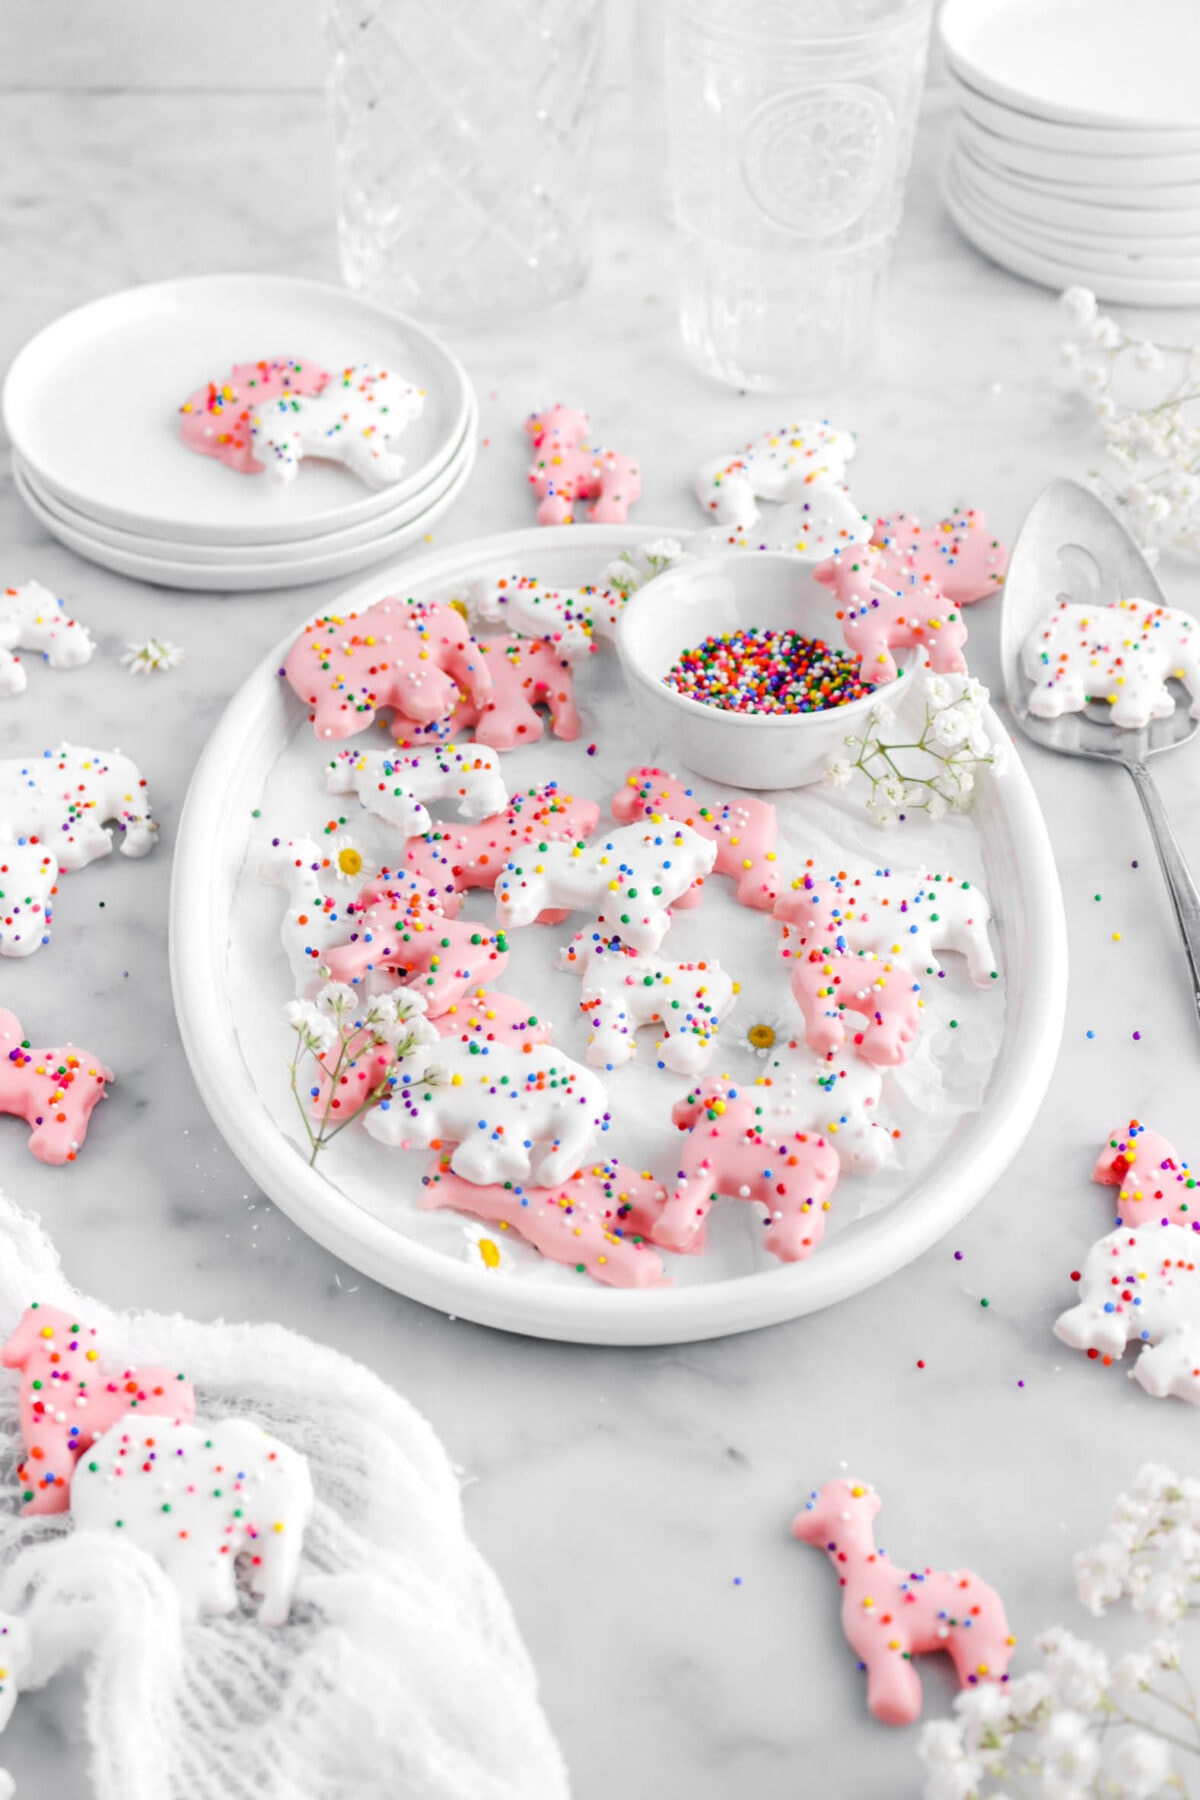 angled front shot of oval platter with pink and white frosted animal cracker cookies with more cookies around on marble surface with plates and empty glasses behind.